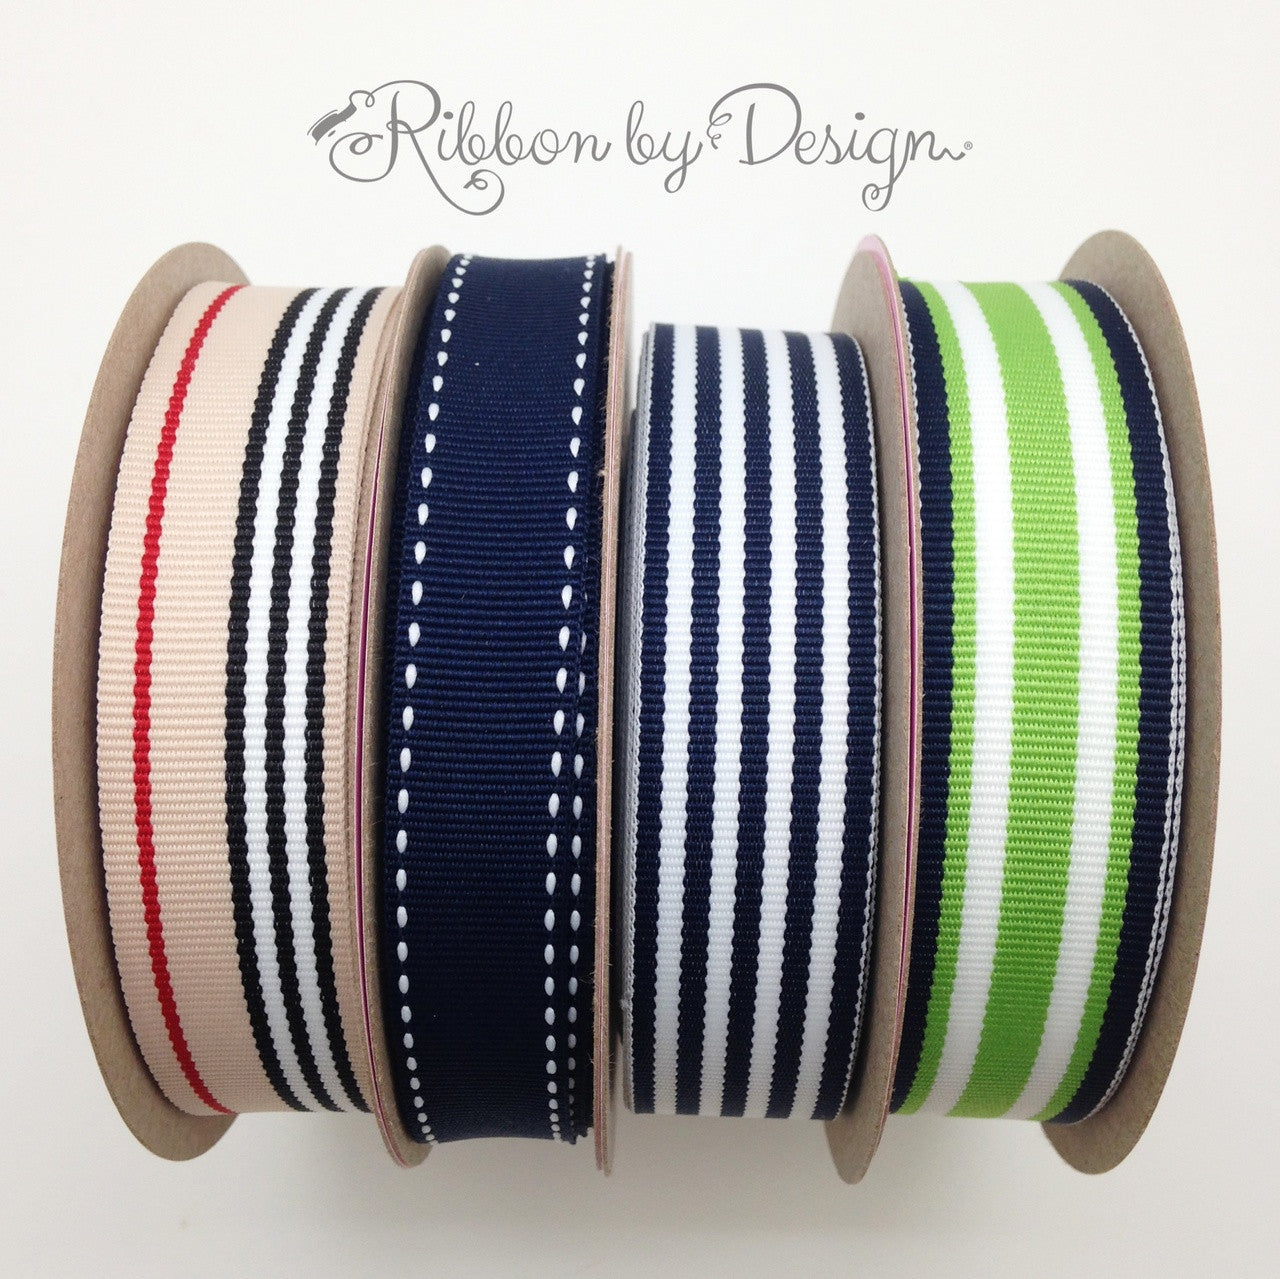 Our selection of woven ribbons is perfect the prepster gift giver or recipient!